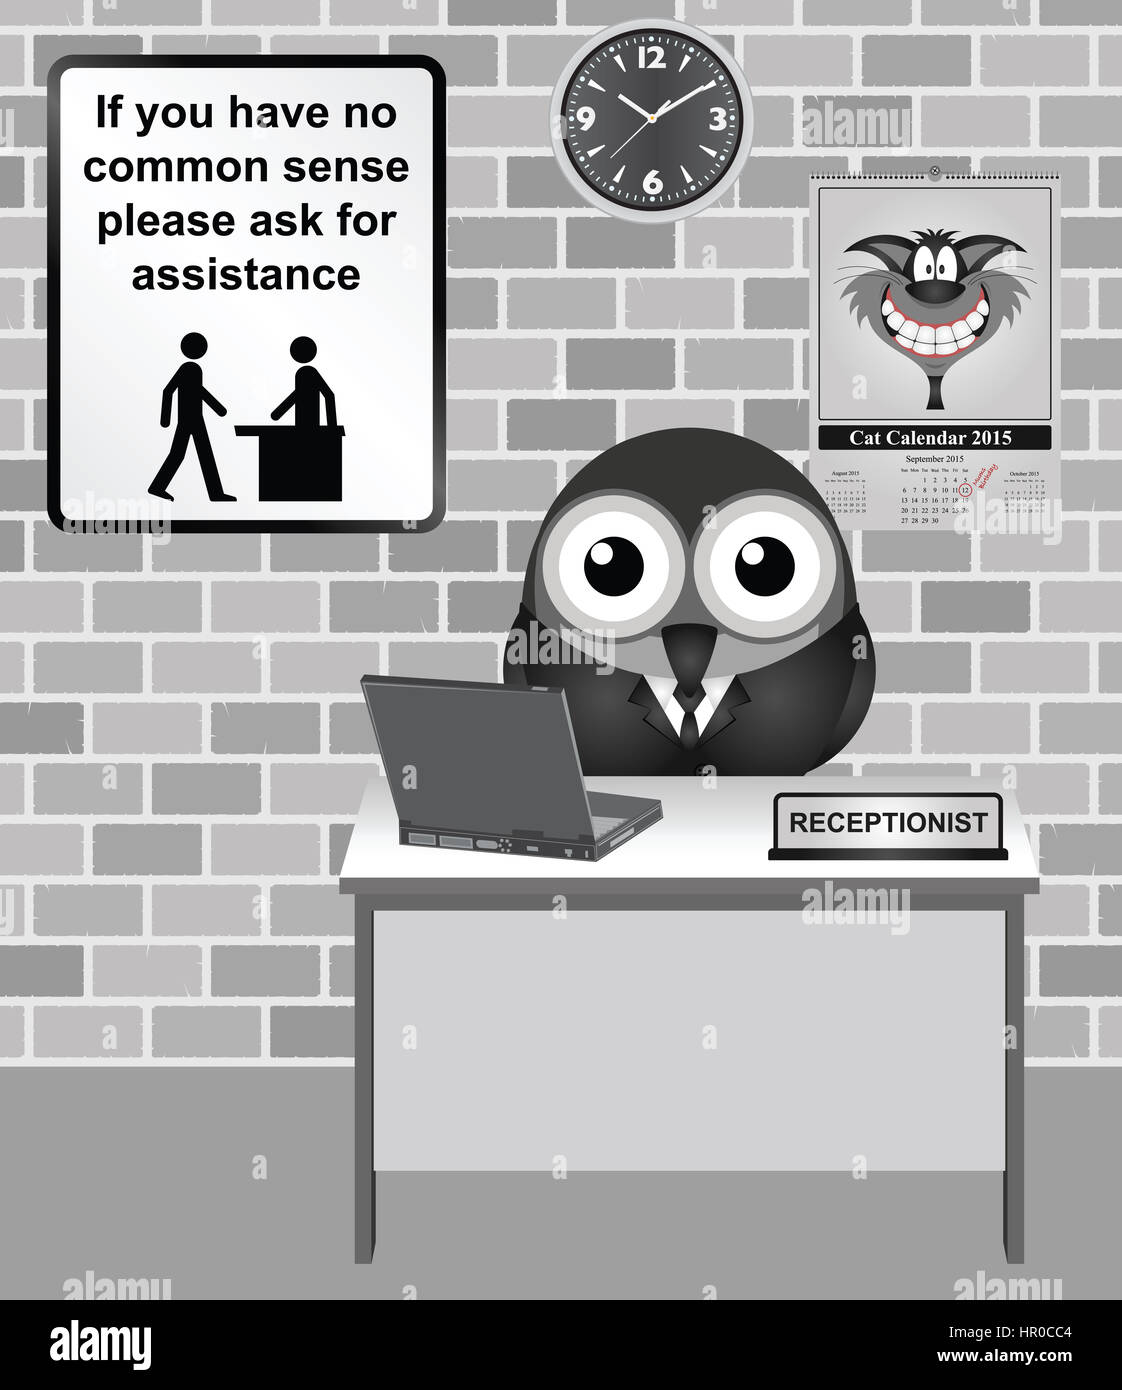 Comical bird Receptionist with common sense information sign Stock Photo